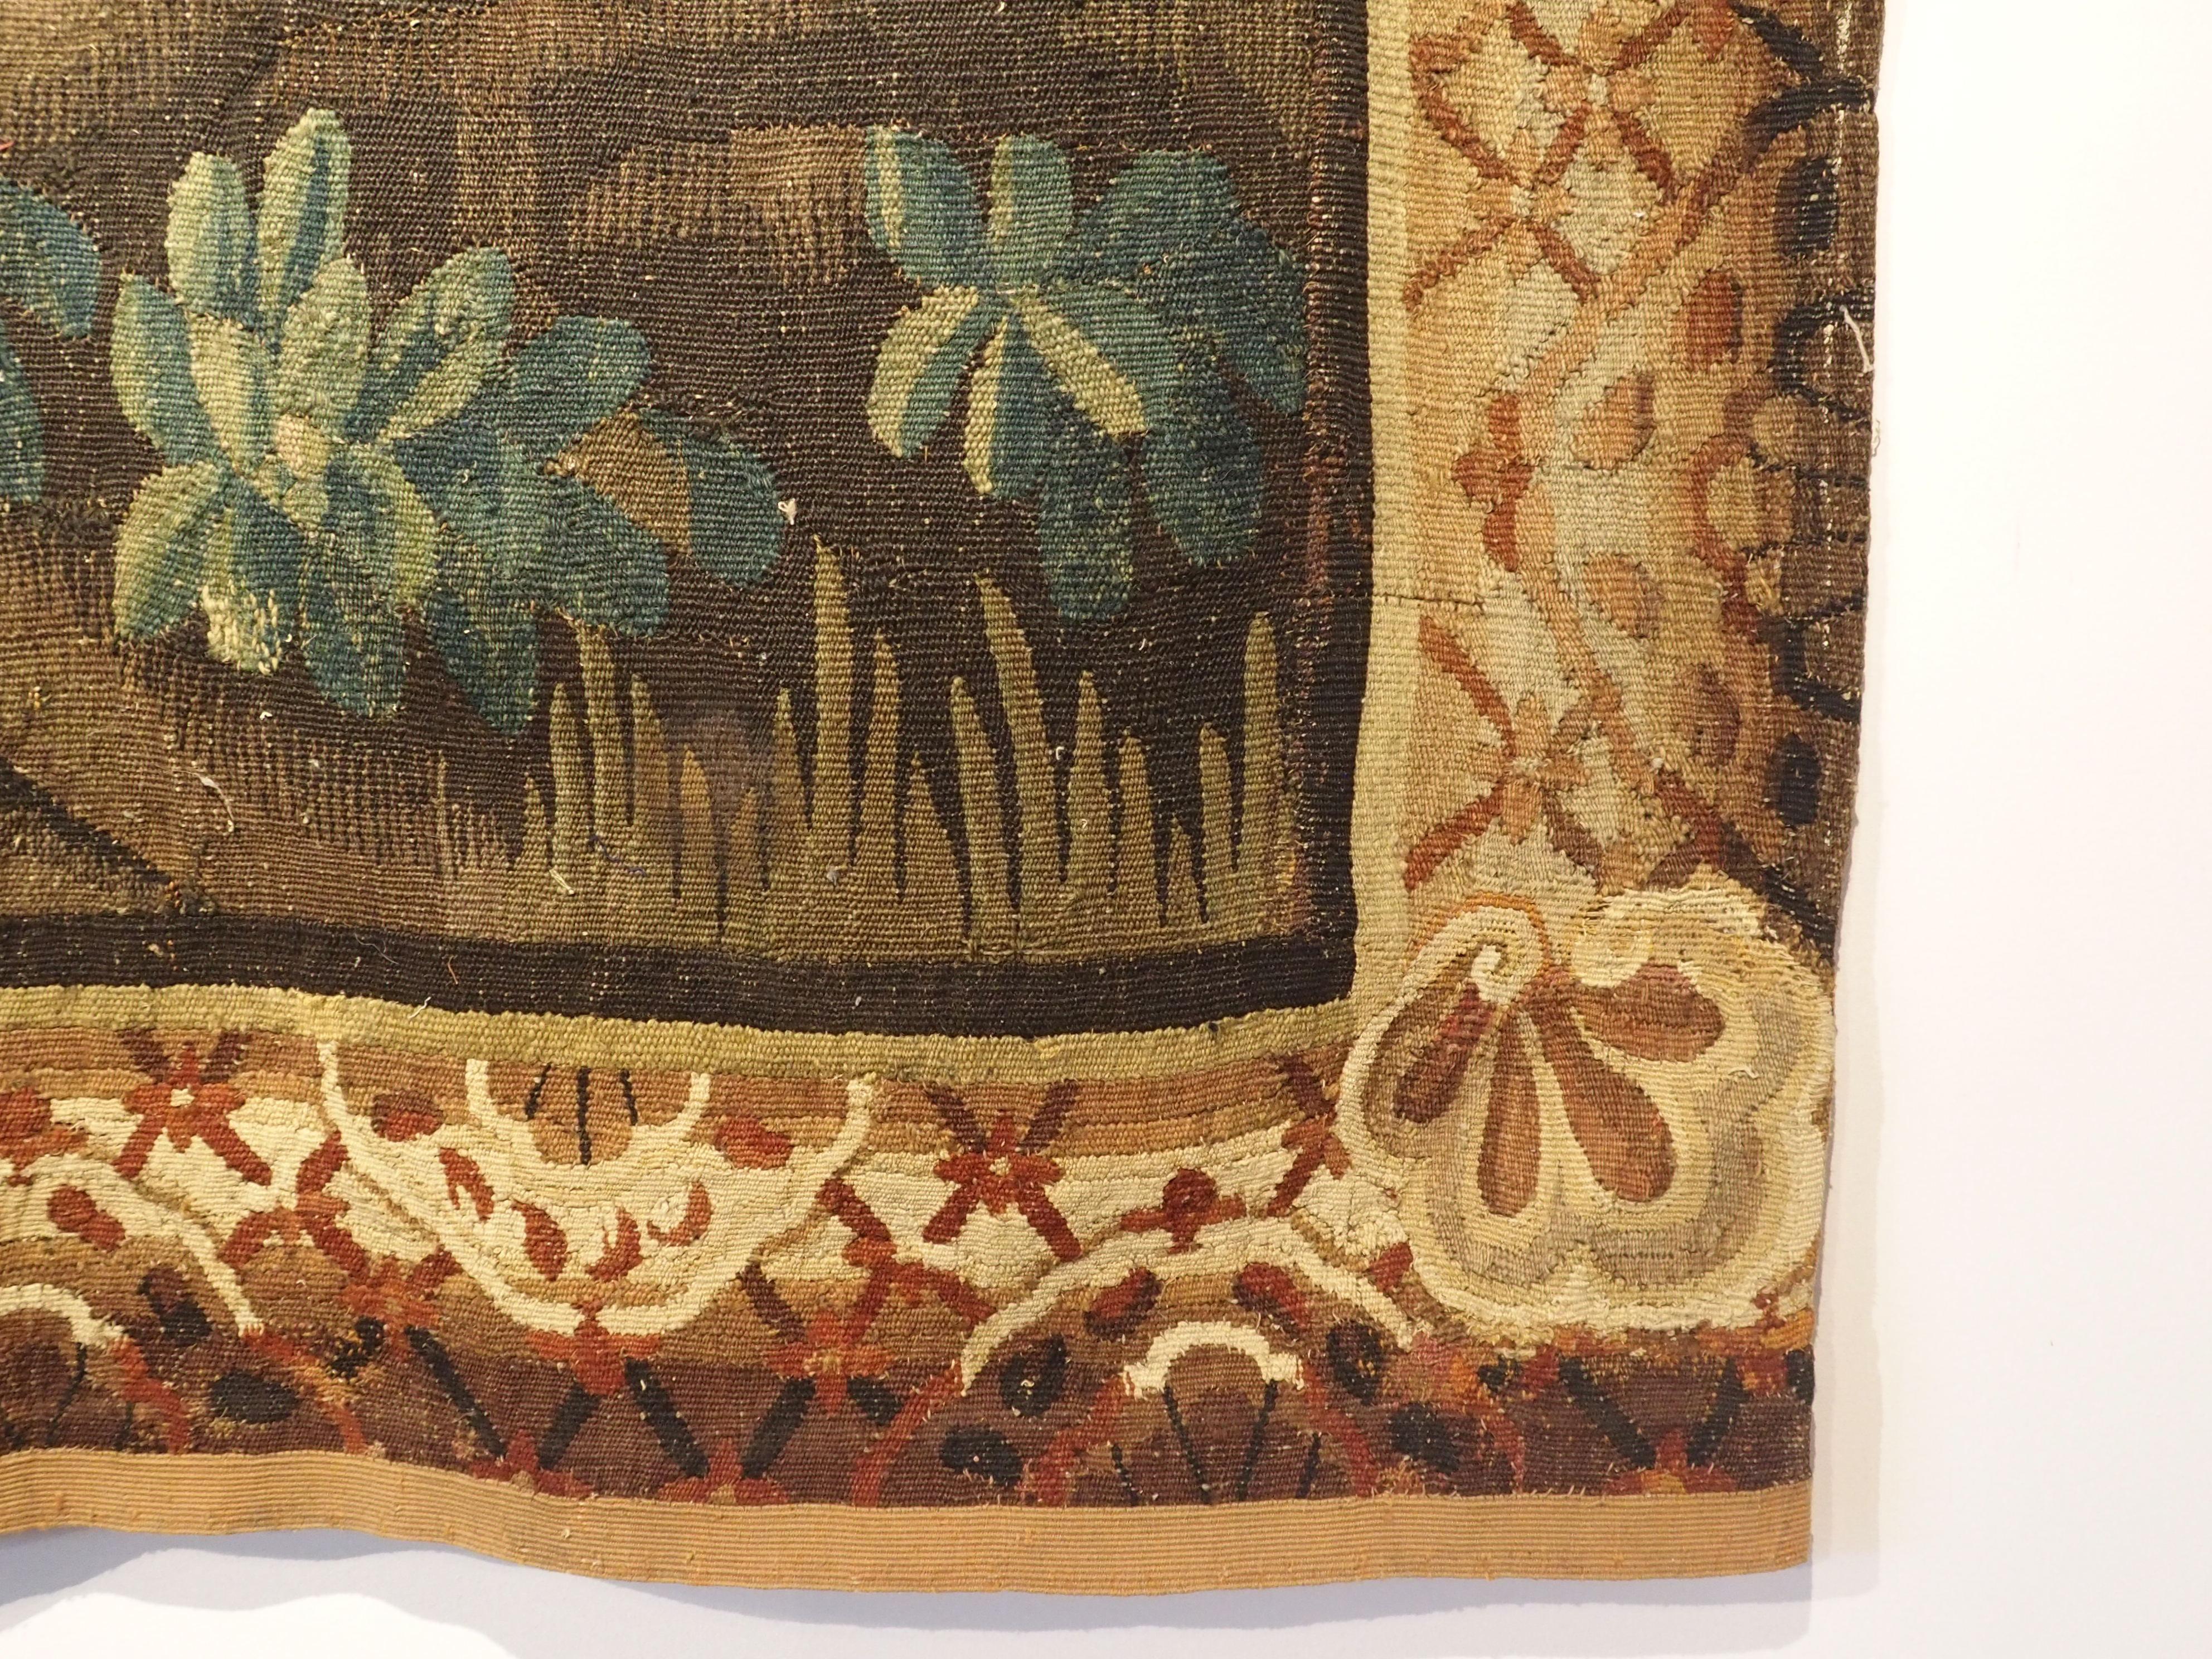 This impressive verdure landscape tapestry, made from wool and silk dates to the 18th Century and is from Flanders, or approximately, present day Northern France and Belgium. Along with the usual colors associated with verdure tapestries, this piece